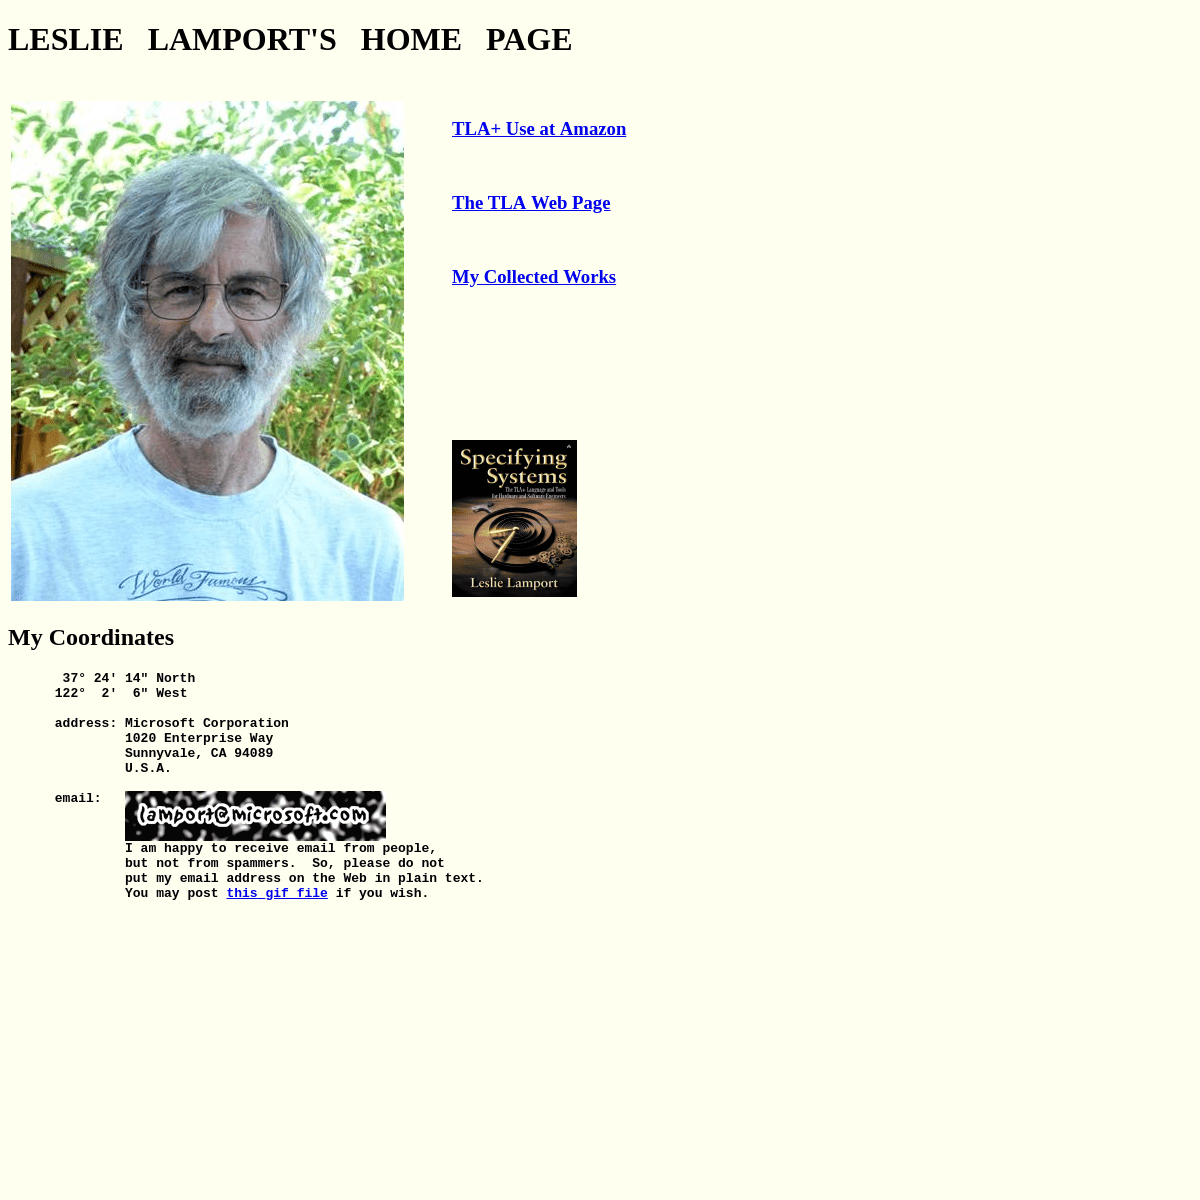 Leslie Lamport's Home Page 